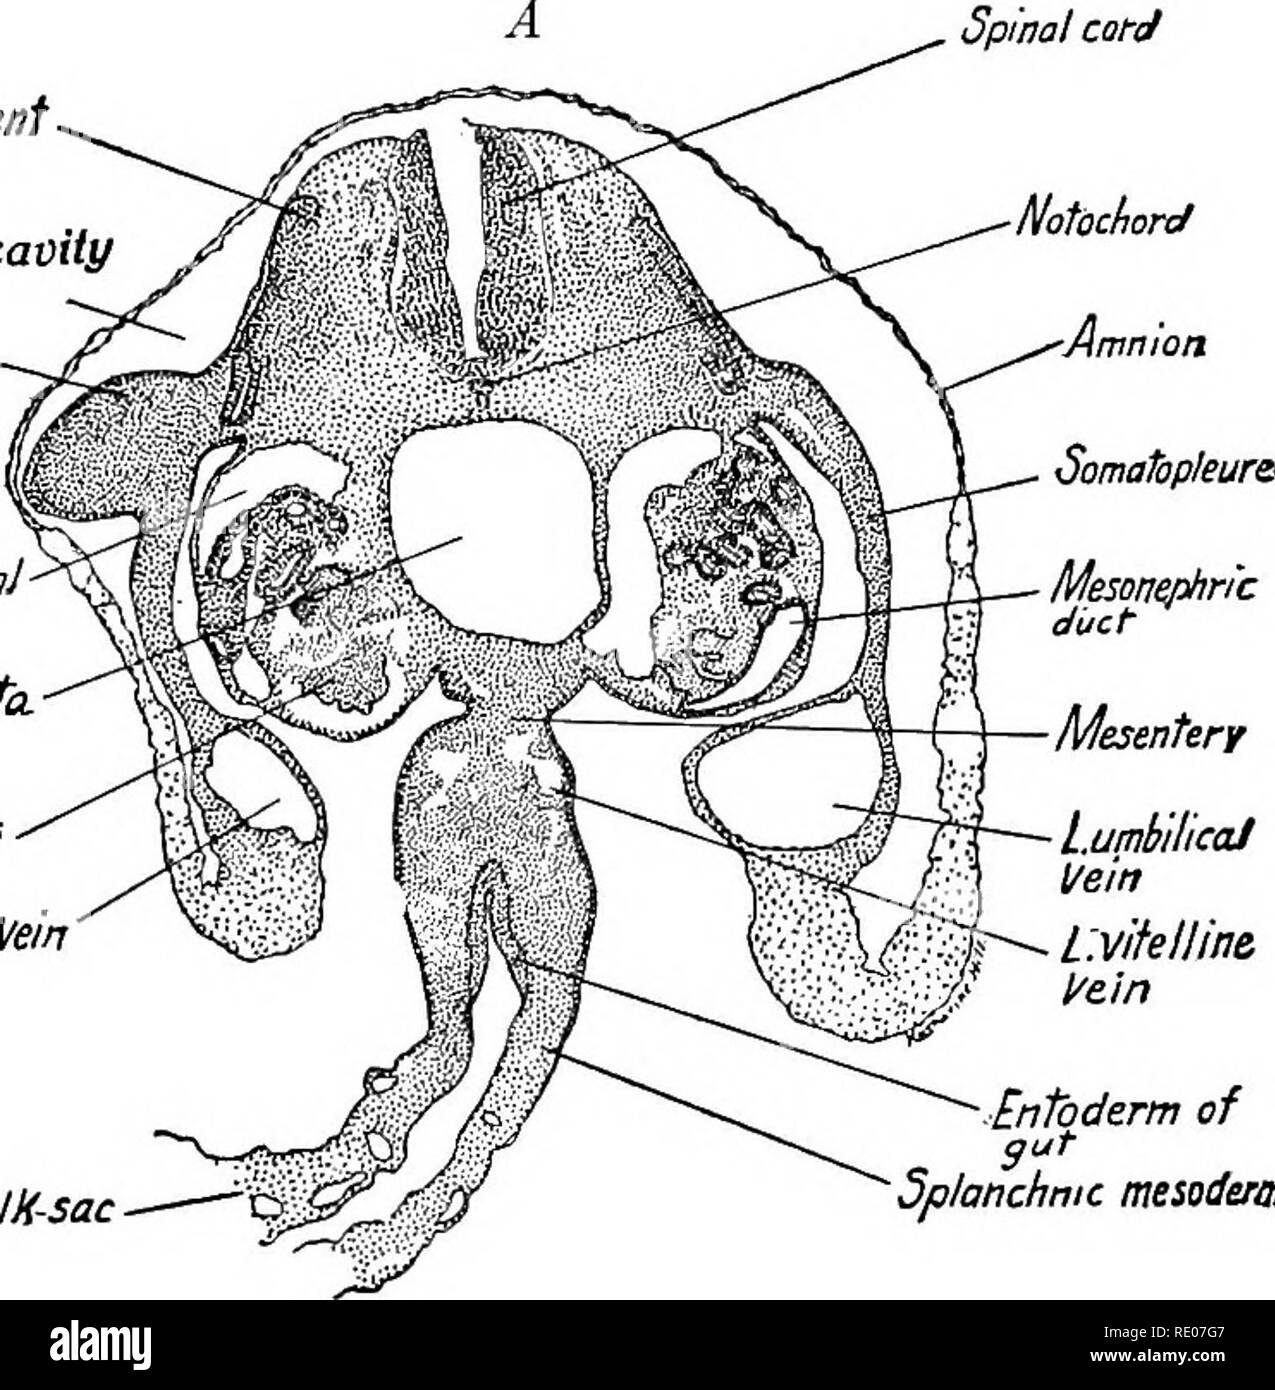 . A laboratory manual and text-book of embryology. Embryology. 78 THE FETAL MEMBRANES AND EARLY HUMAN EMBRYOS chorionic cells (Fig. 69). When the allantoic circulation is established, waste prod- ucts given off from the blood of the embryo must pass through the epithelia of Spinal cord Mes.se/me/it Amniotic cavity Upper limb bud fbstcmdinoJ vein 'Dorsal aorta. Glomerulus Rumb'ilical Vein WallofYolK-sac. LumbilicaJ Vein L'.vitellim fein â Entoderm of gut Splanchnic mesoderm. Entoderm of primitive gut 3 .Amnio Ectoderm Hind-gut. Please note that these images are extracted from scanned page image Stock Photo